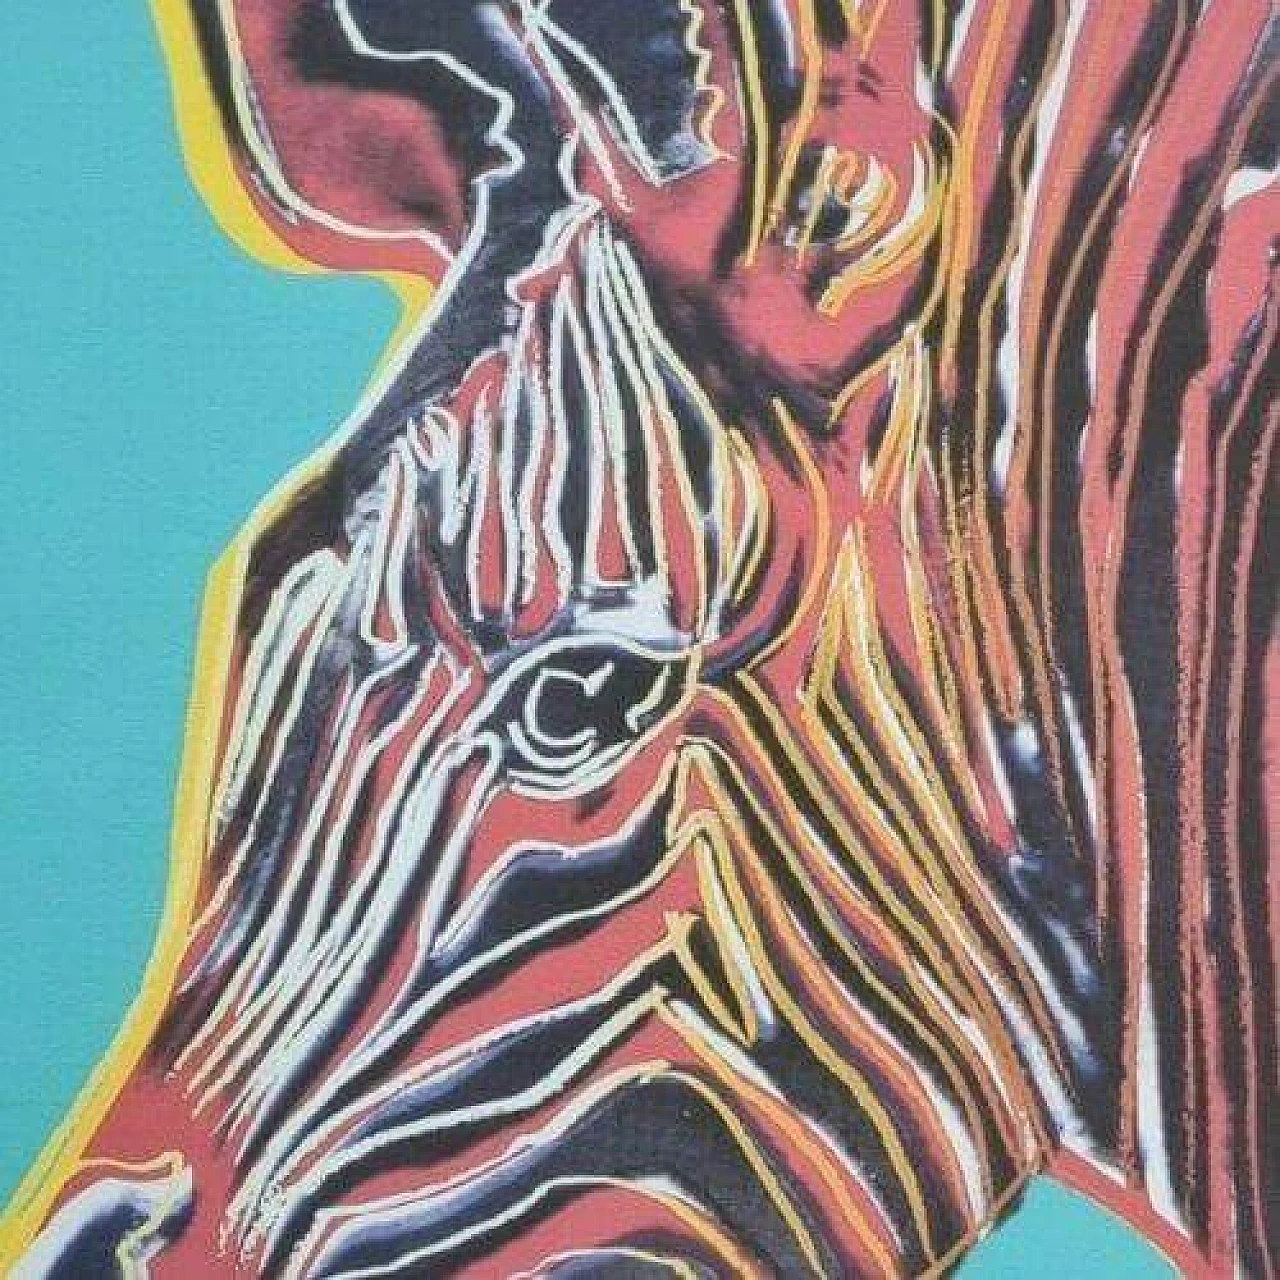 Zebra, lithography, reproduction after Andy Warhol 4